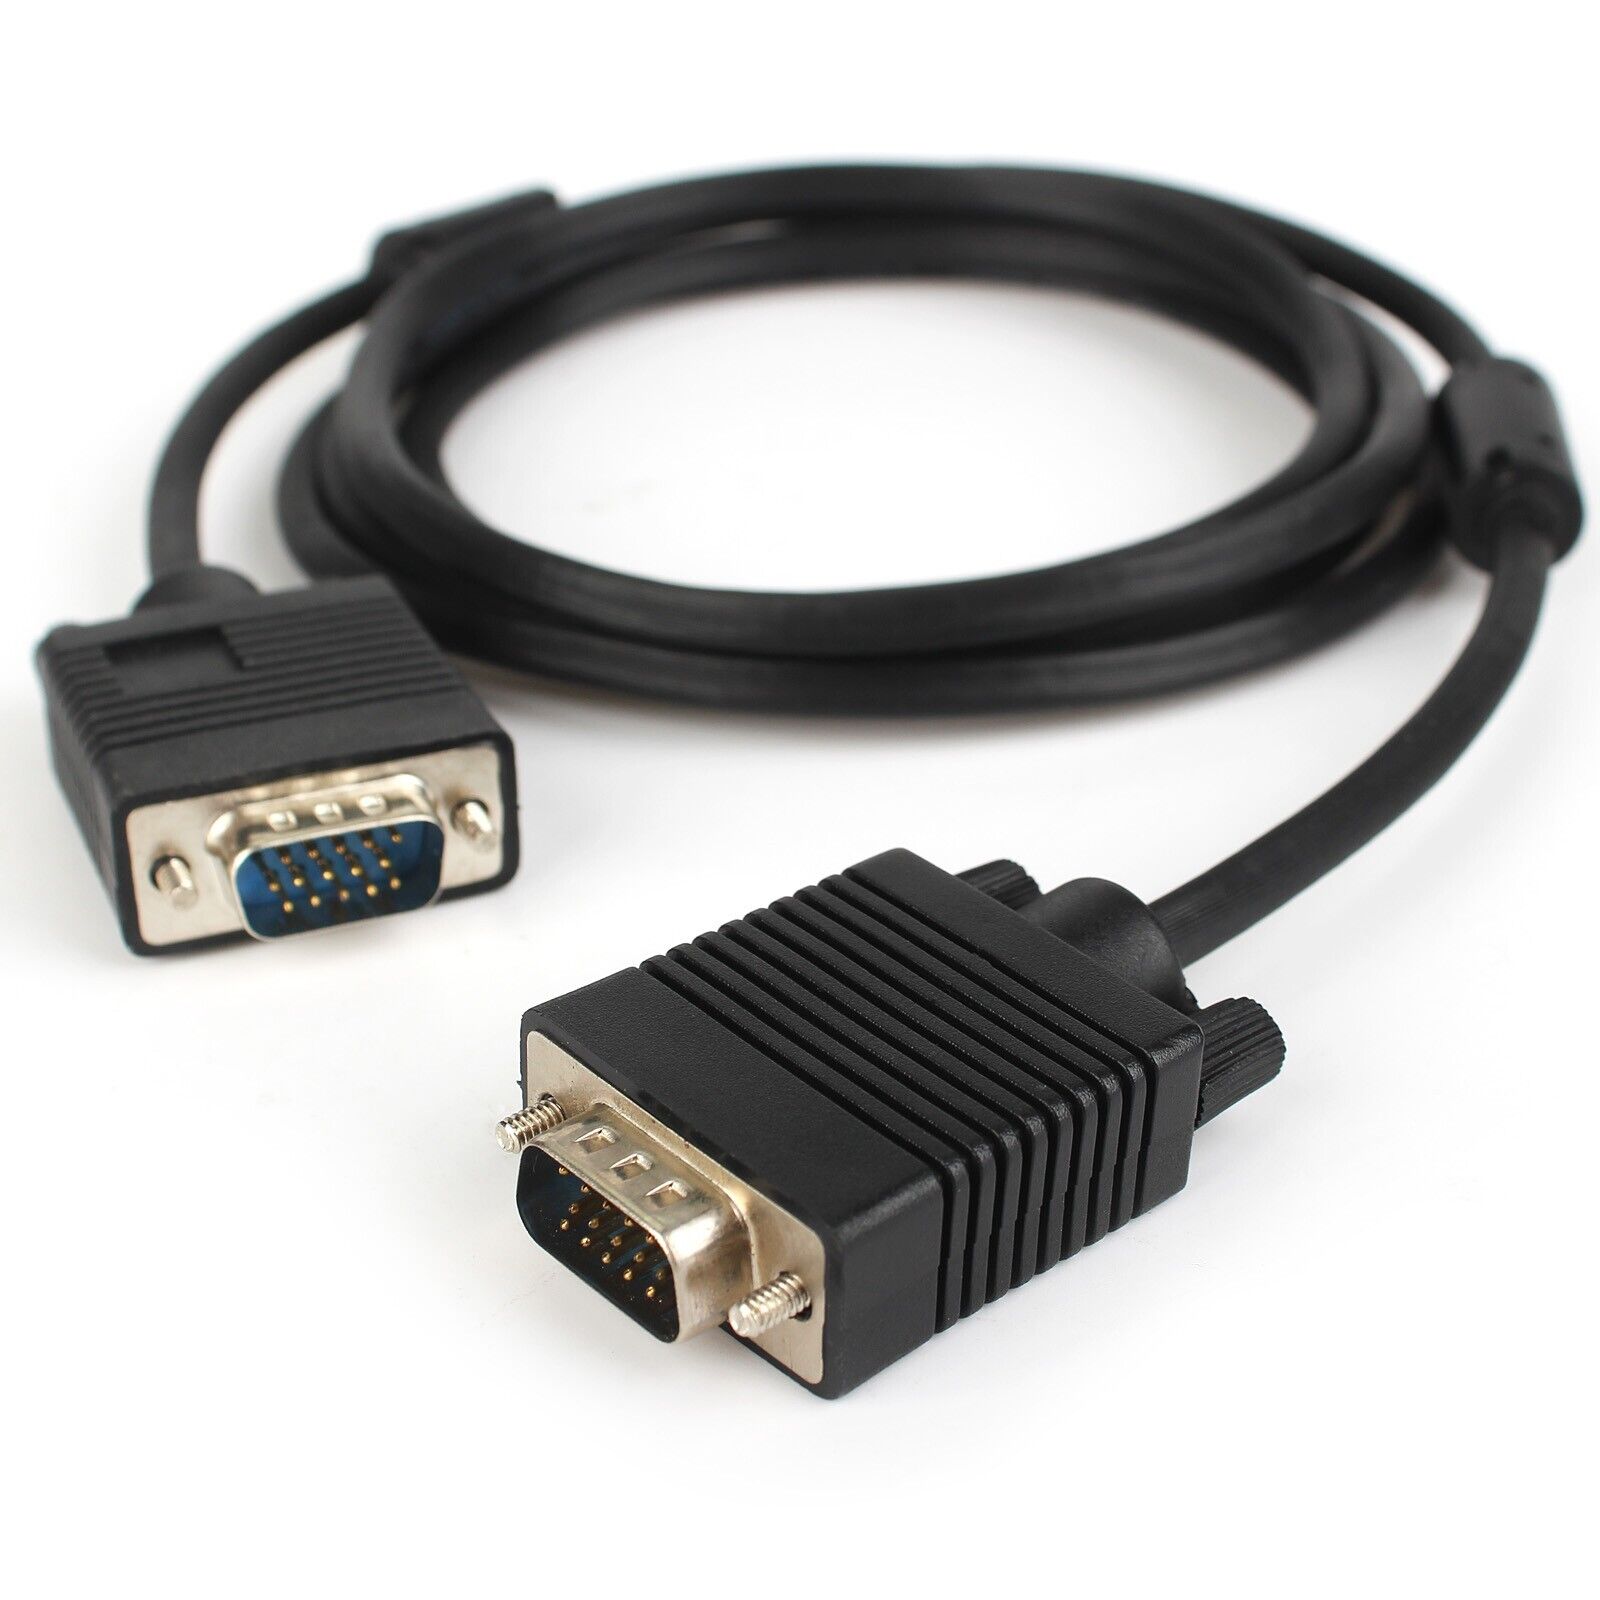 HeavyDuty VGA Cable 10ft Male to Male SVGA Monitor Cord for Computer 1080p Video